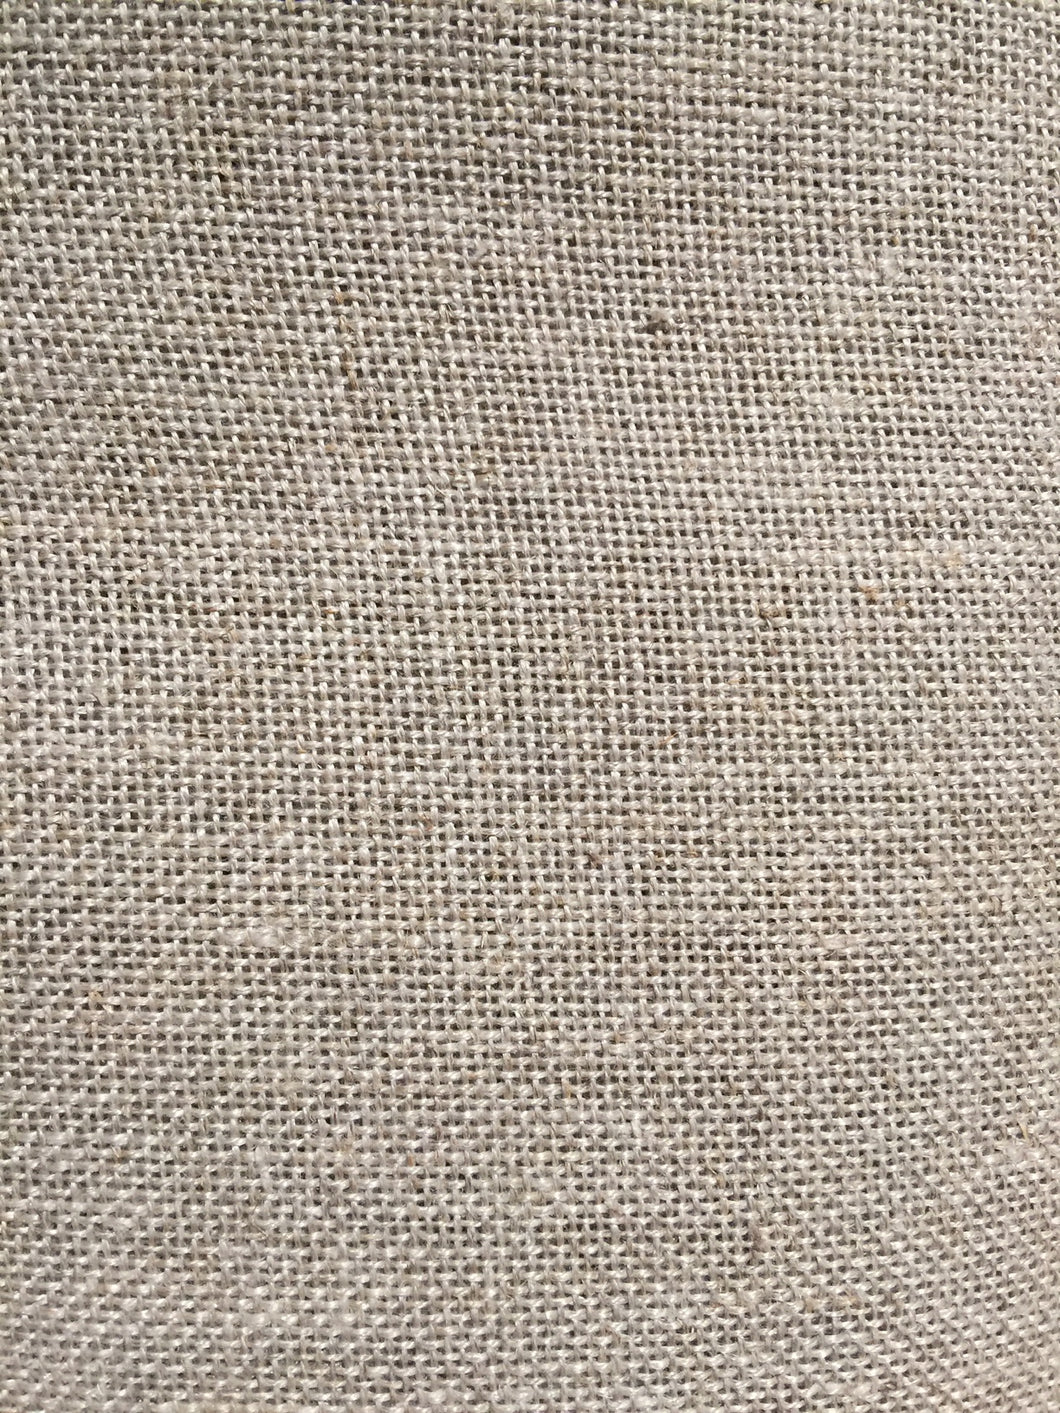 Traditional linen backing